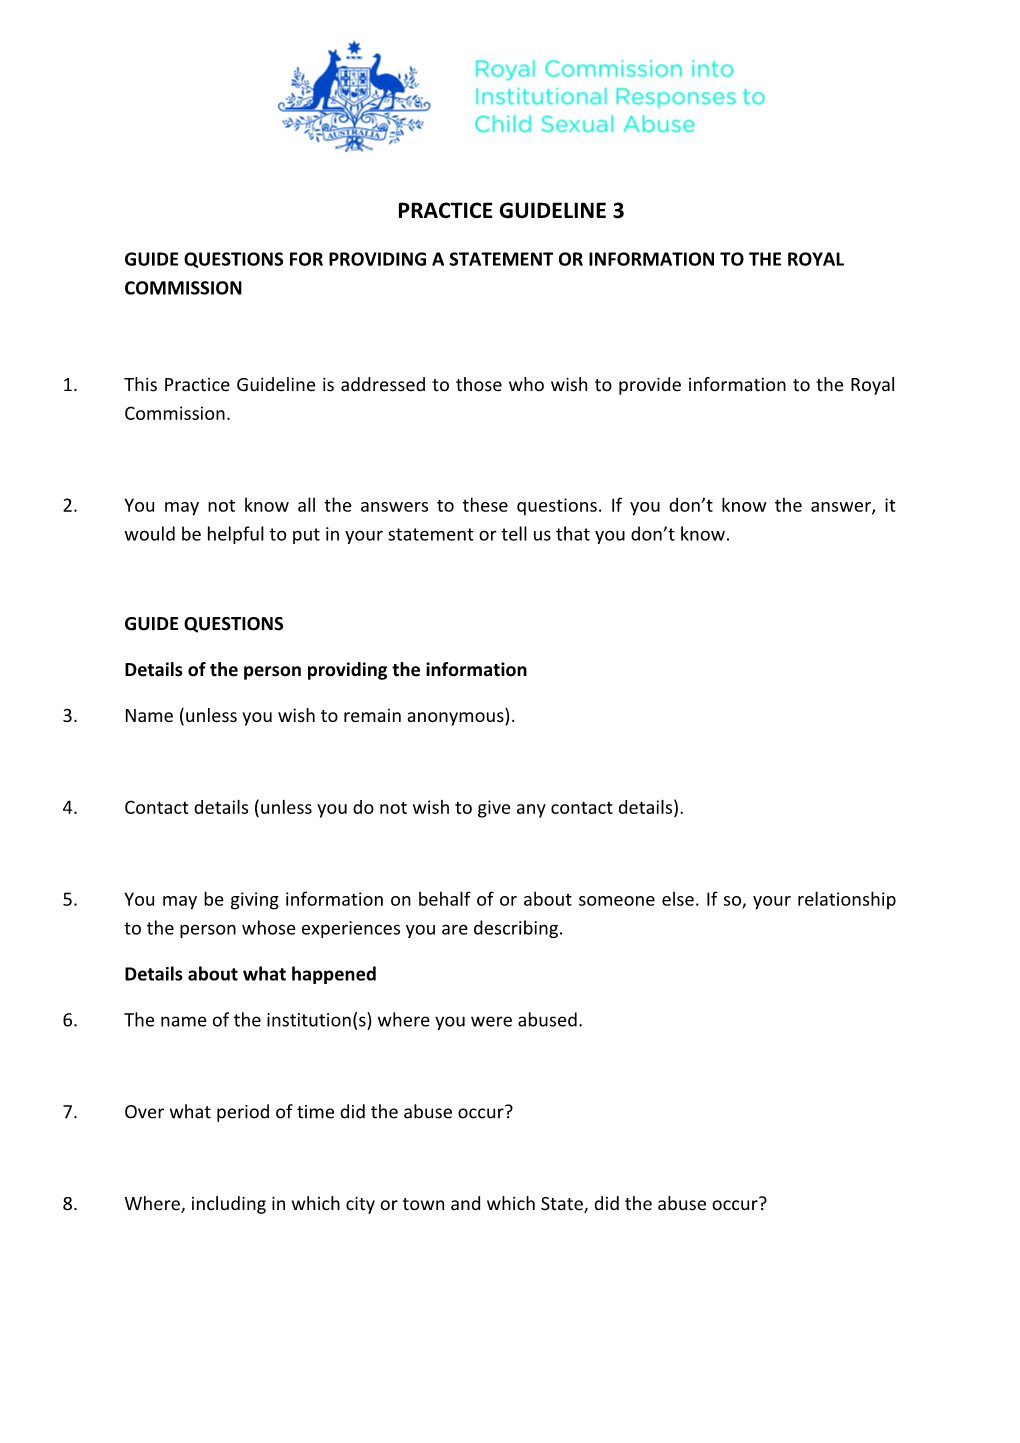 Practice Guideline 3 (Guide Questions for Providing a Statement Or Information Final For